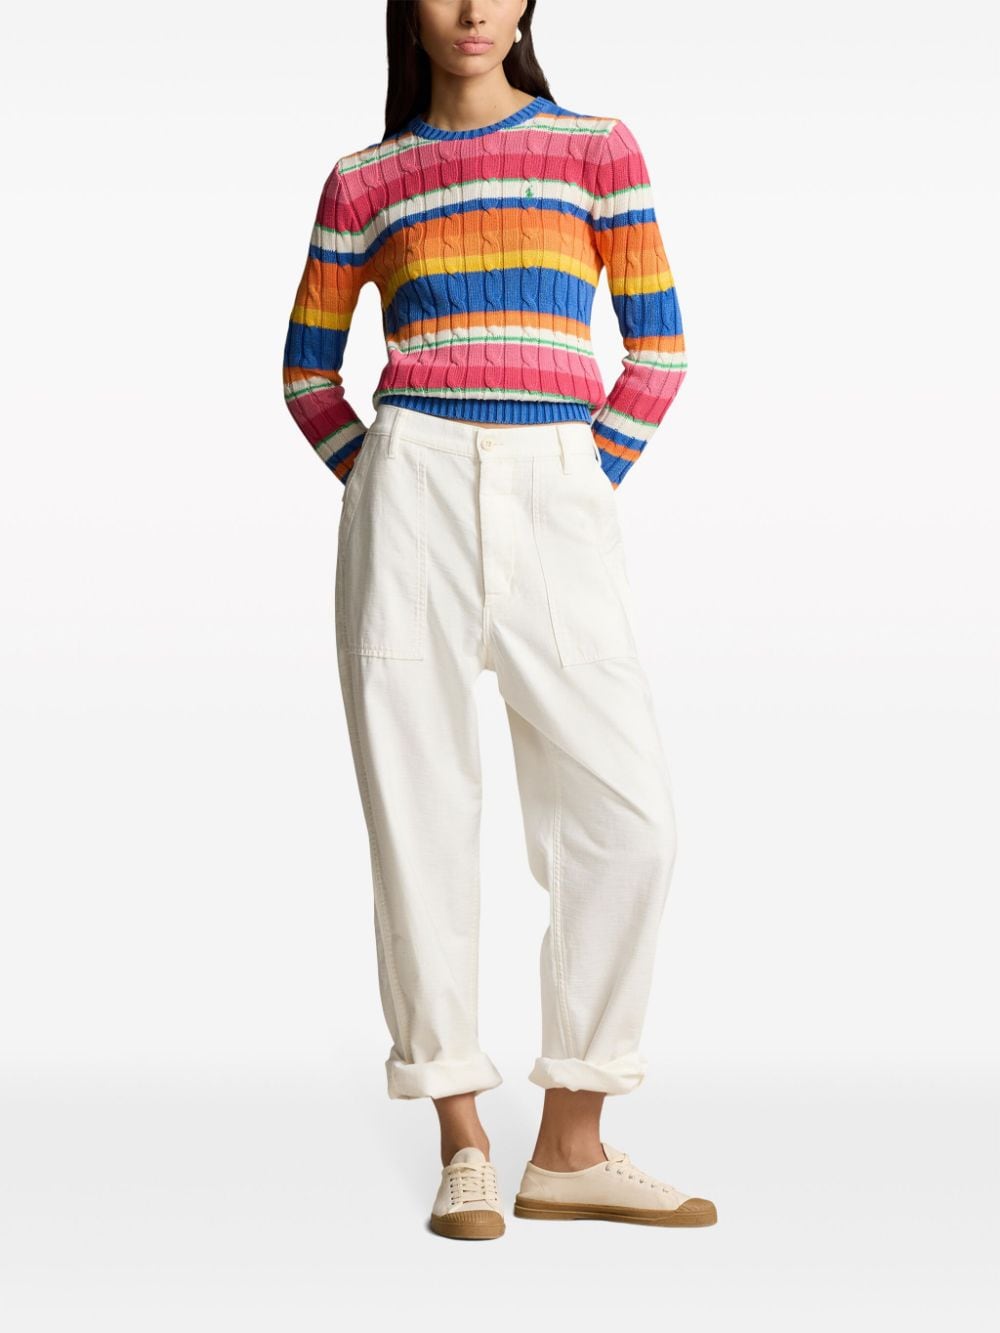 Shop Polo Ralph Lauren Striped Cable-knit Jumper In Blue